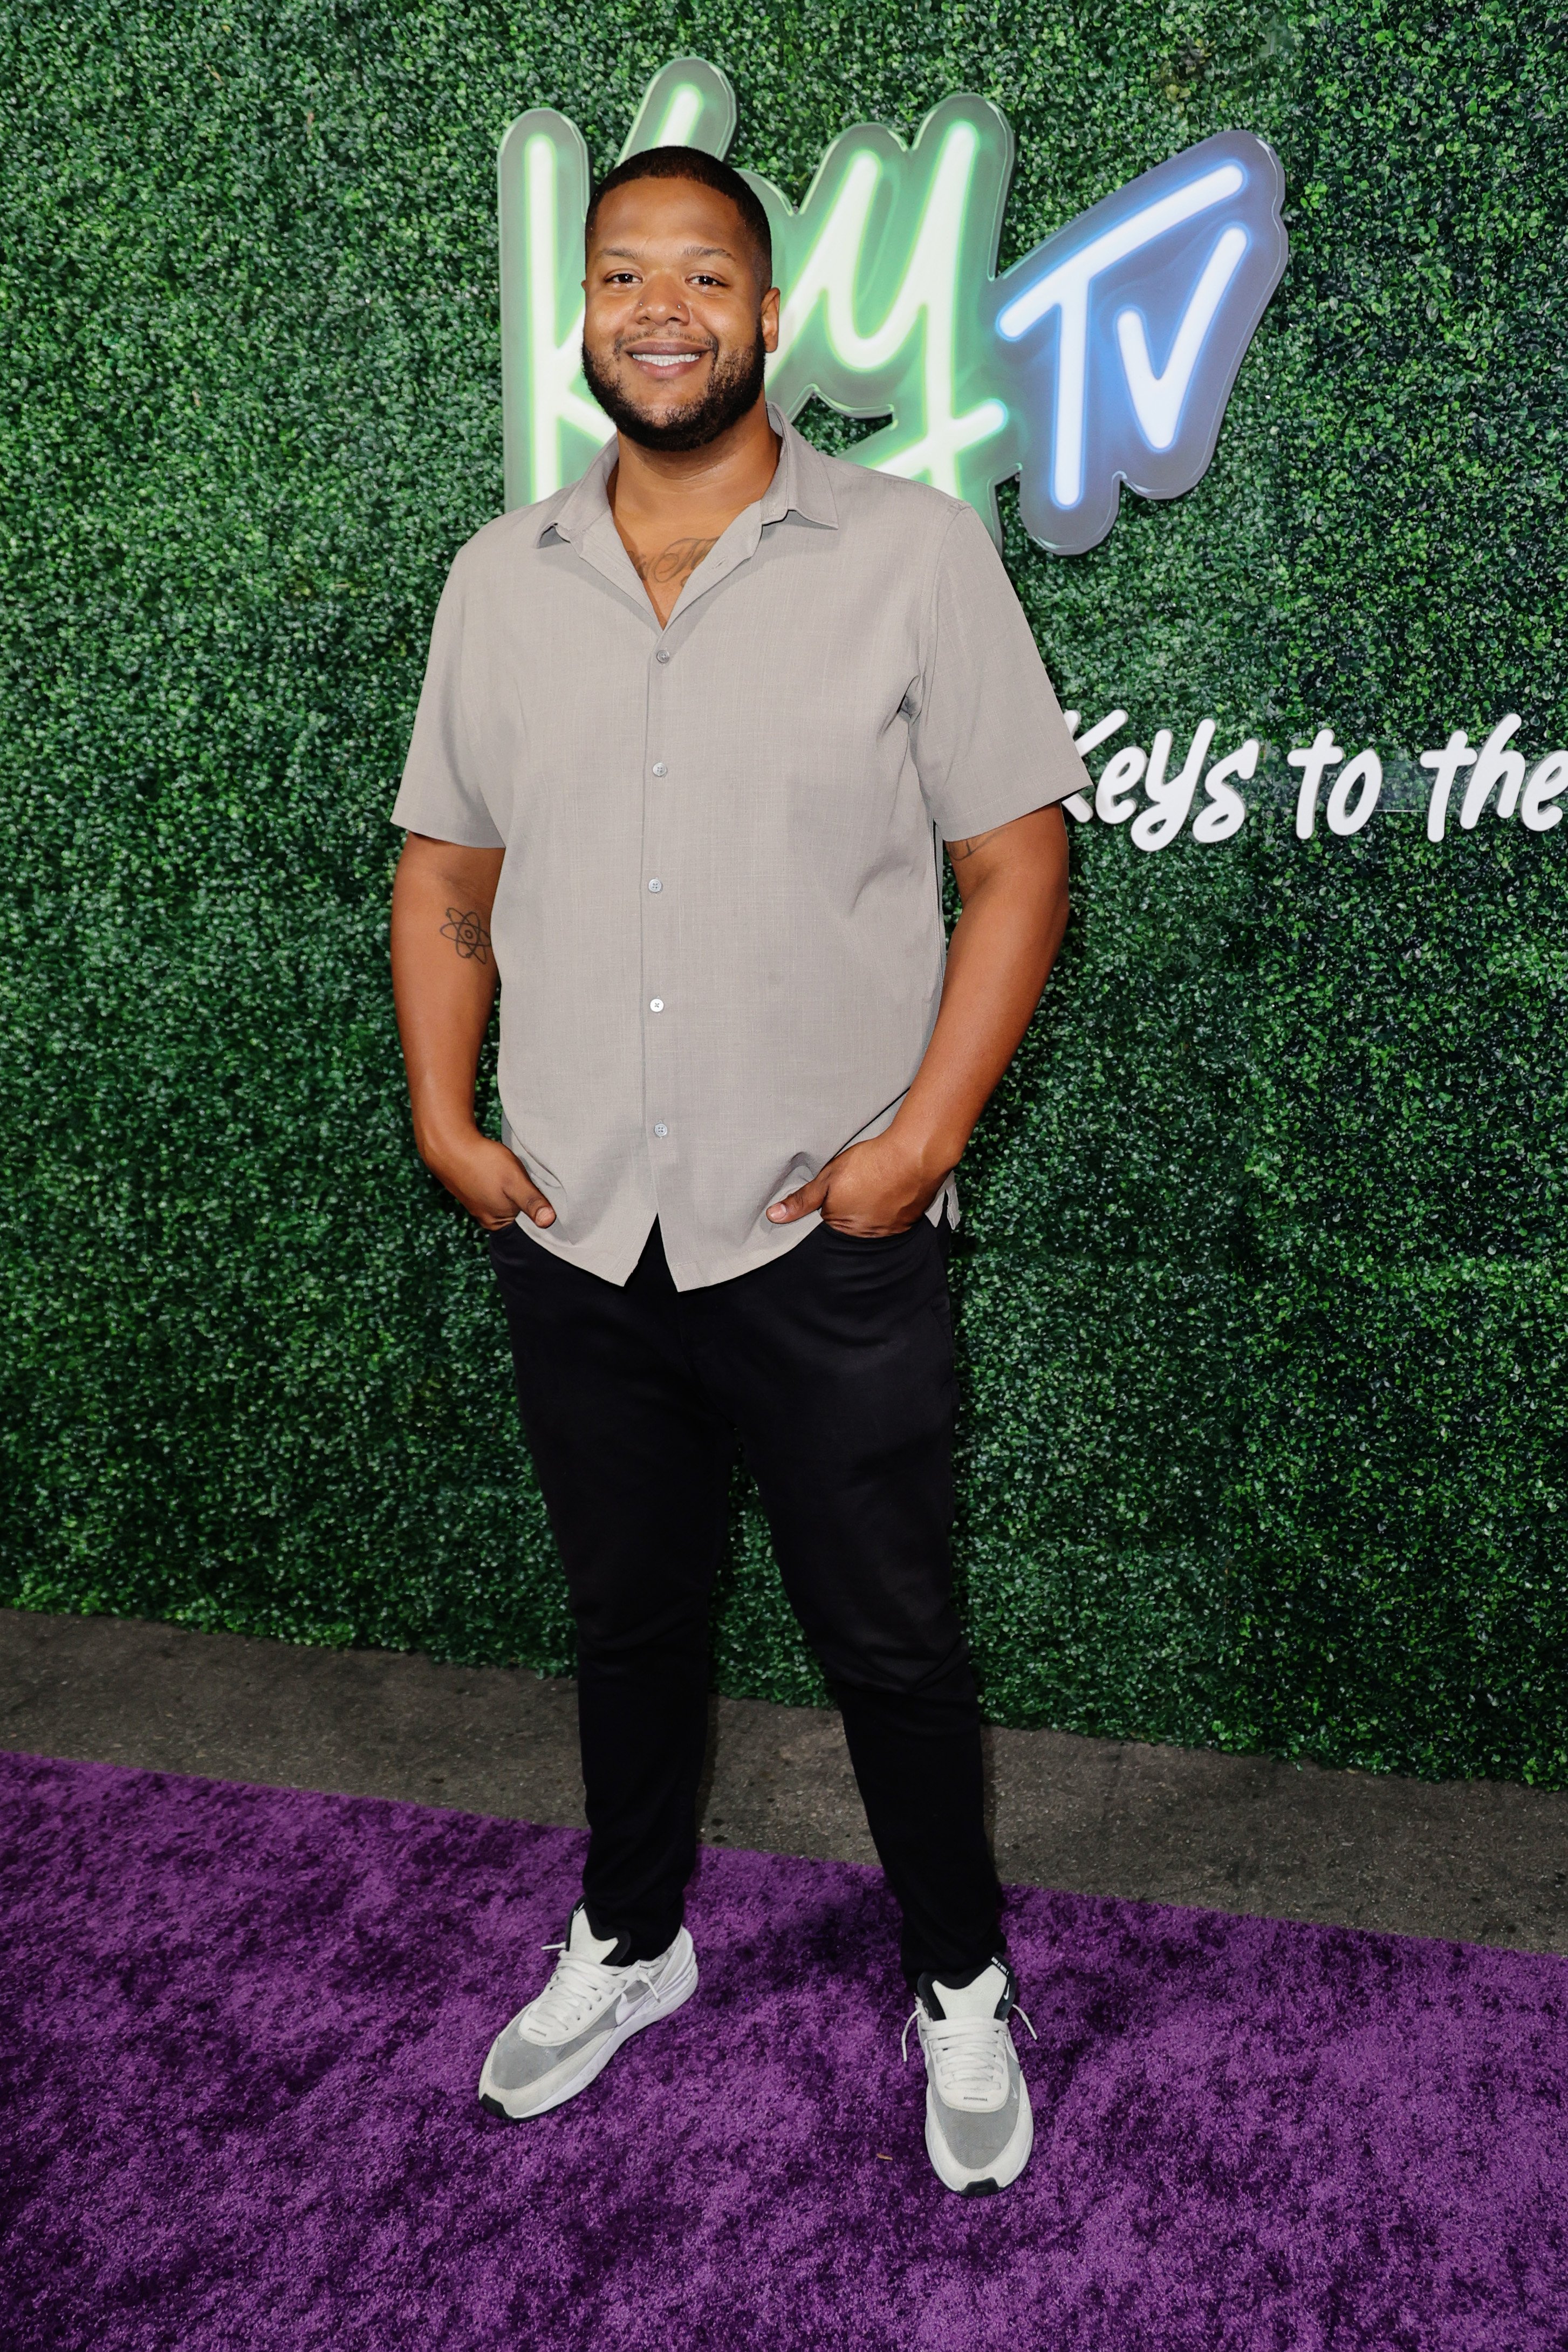 Khalid Jordan at the KeyTV Launch Party Celebration at The Millwick in Los Angeles, California, on October 13, 2022. | Source: Getty Images